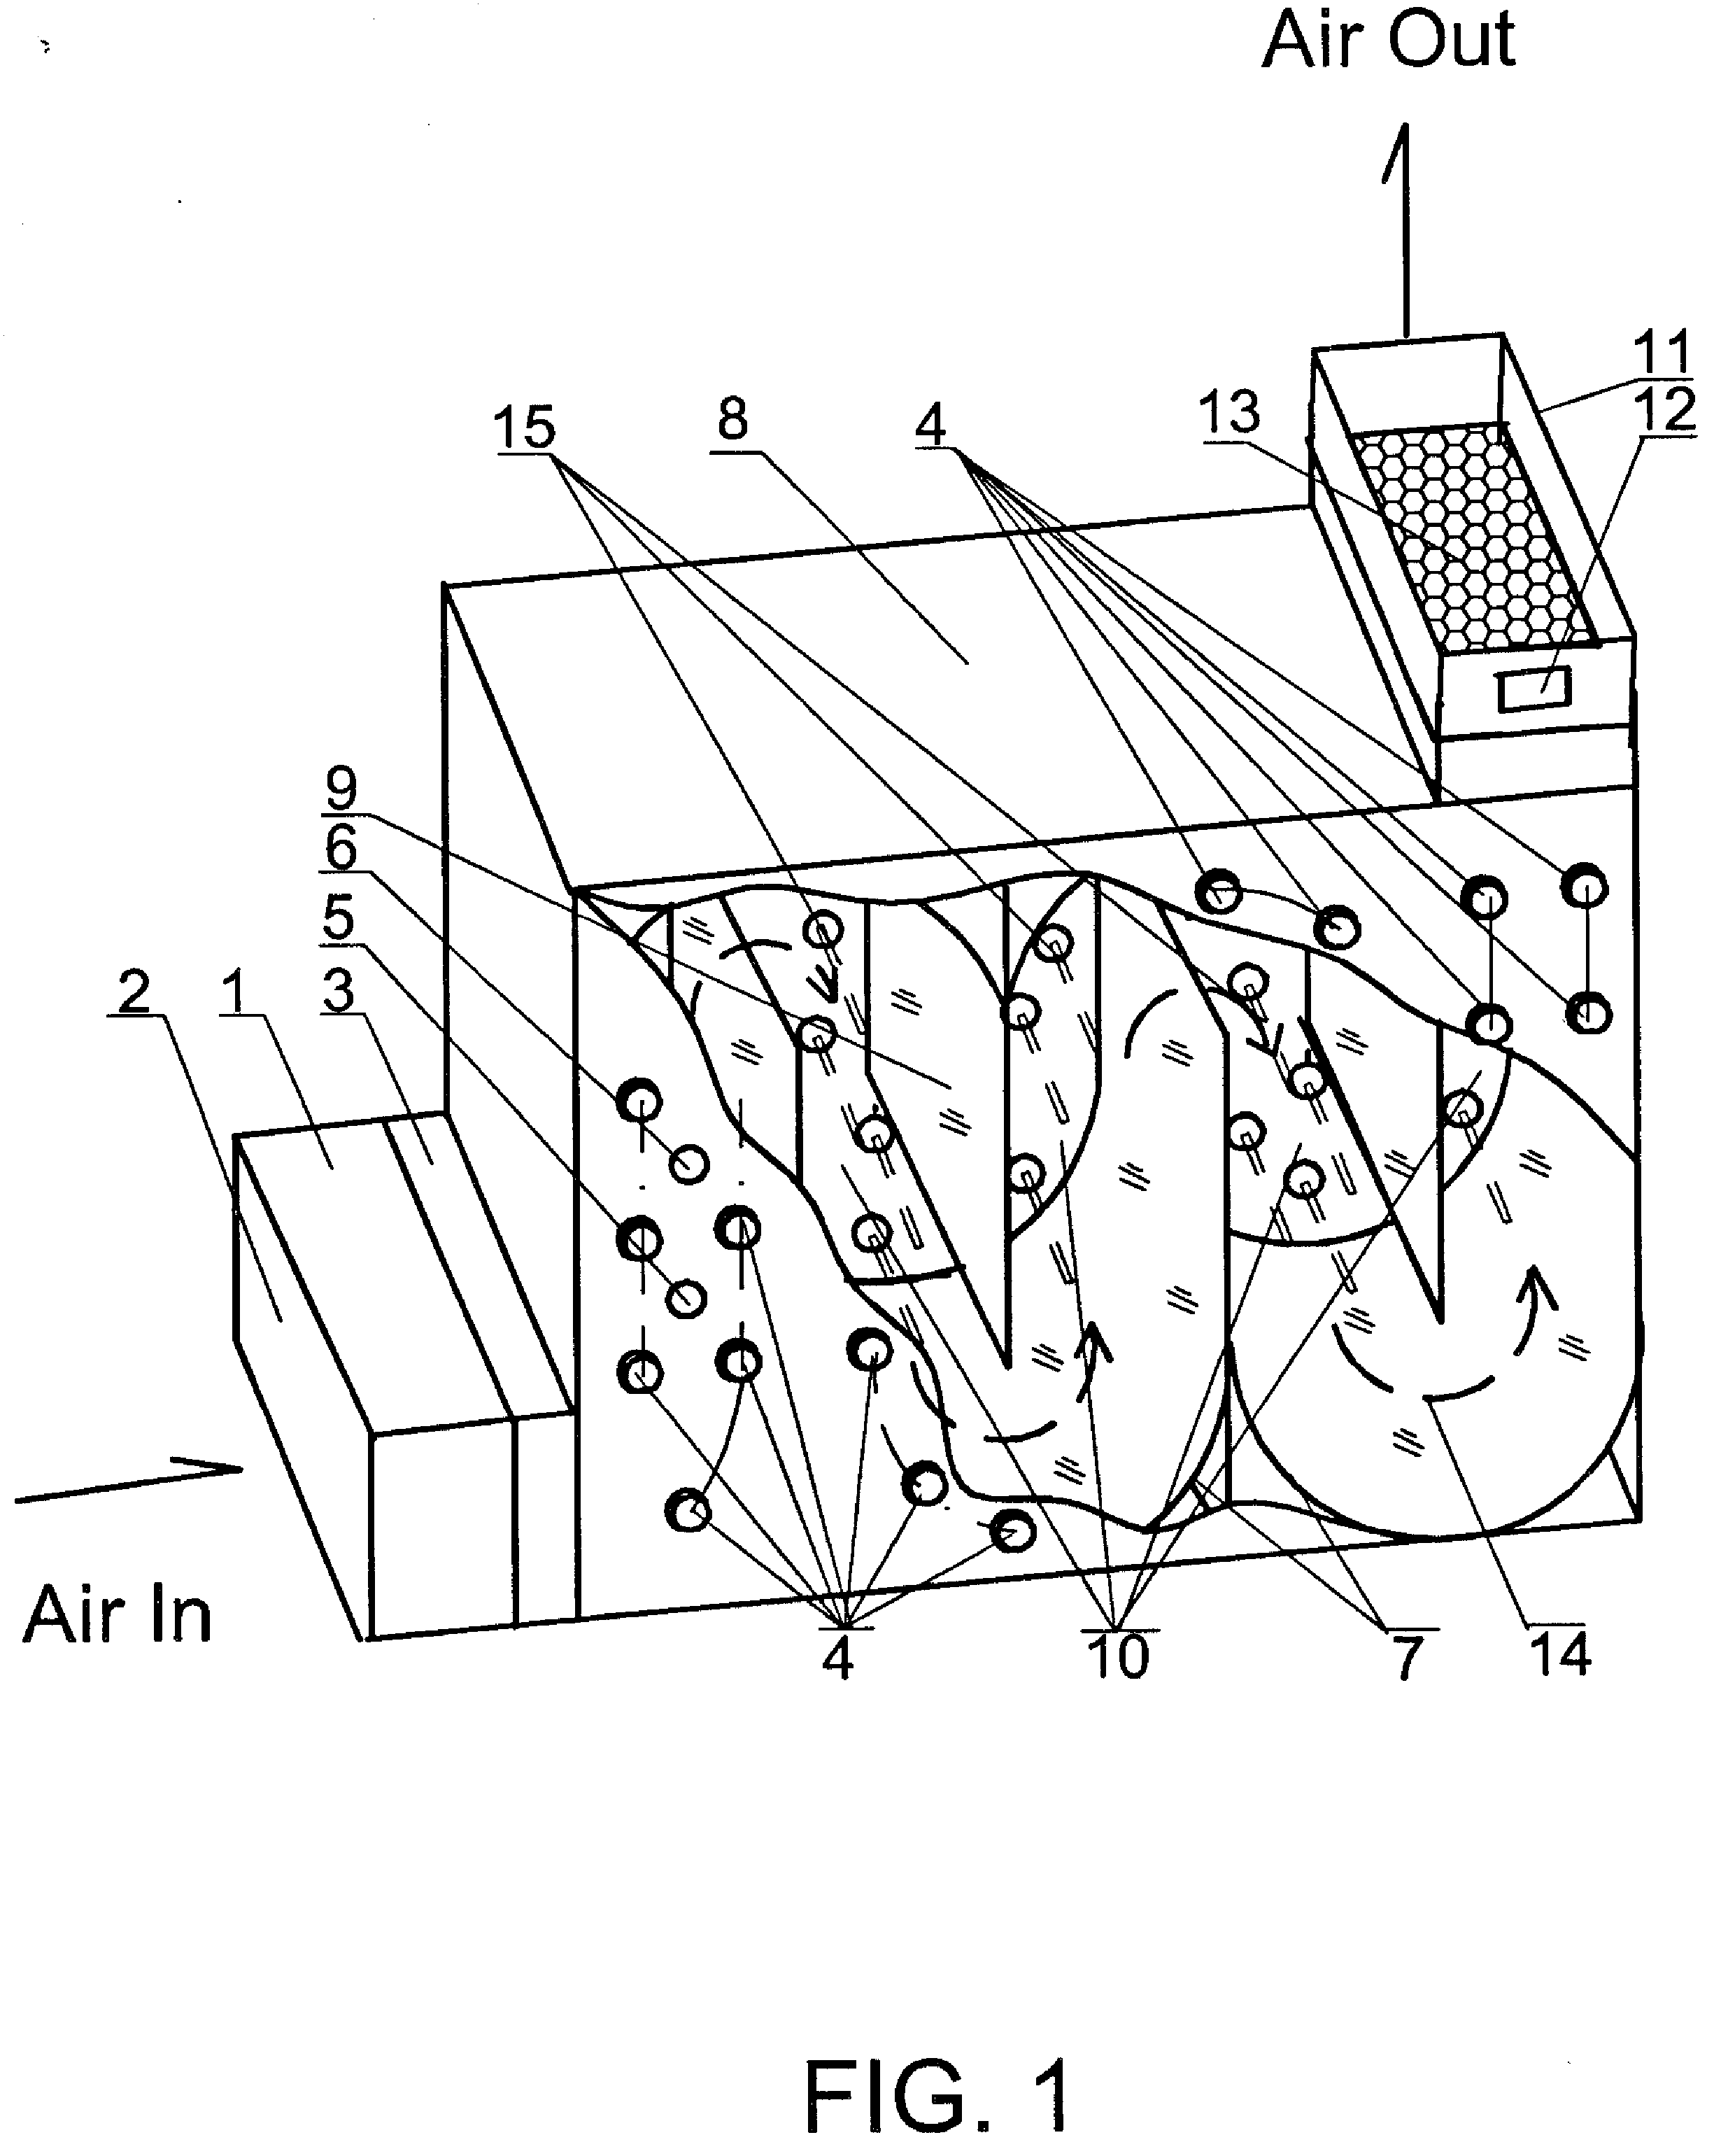 Method and apparatus for sterilizing air in large volumes by radiation of ultraviolet rays